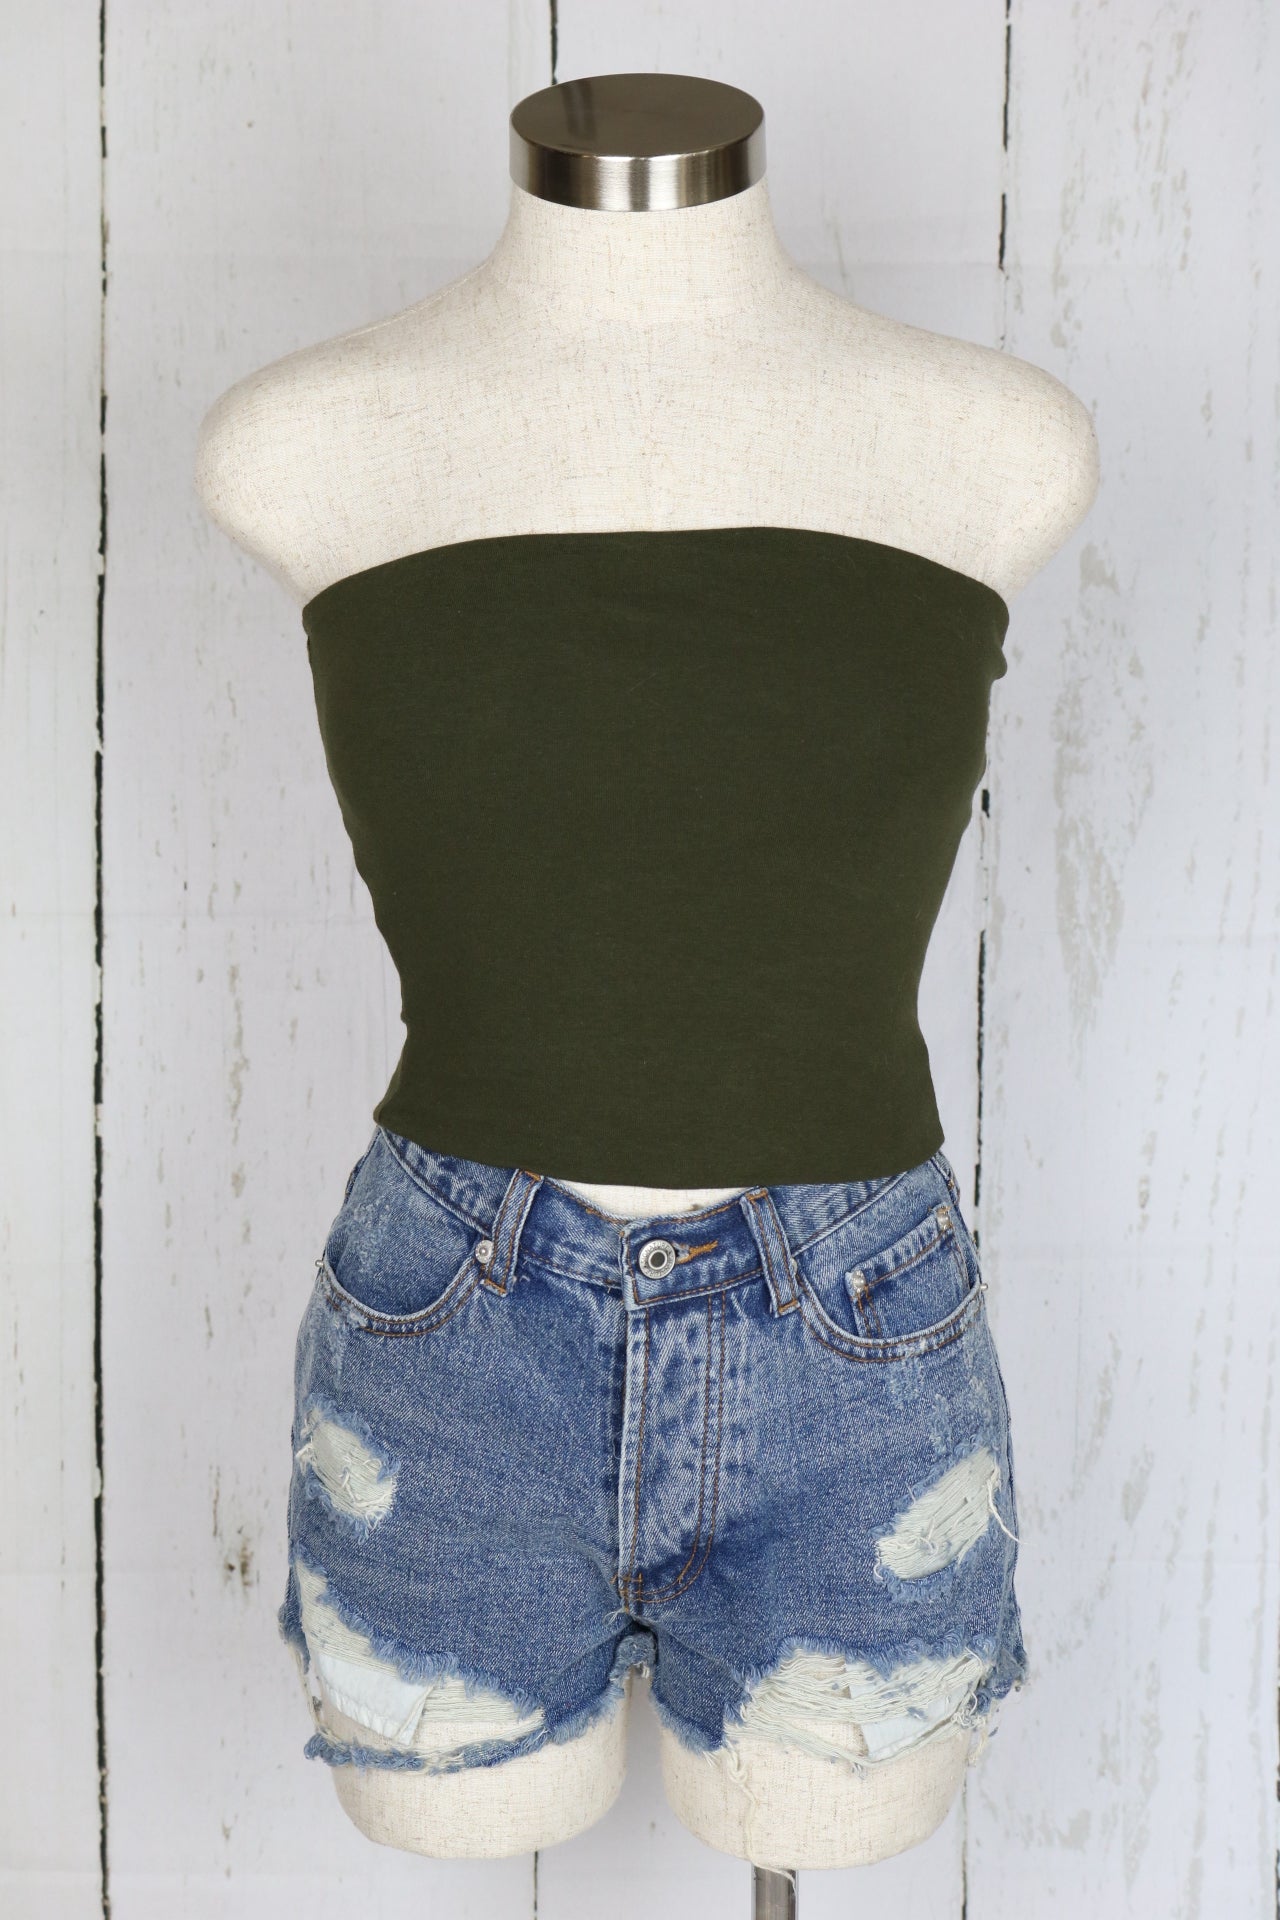 Shelby Tube Top (Olive)